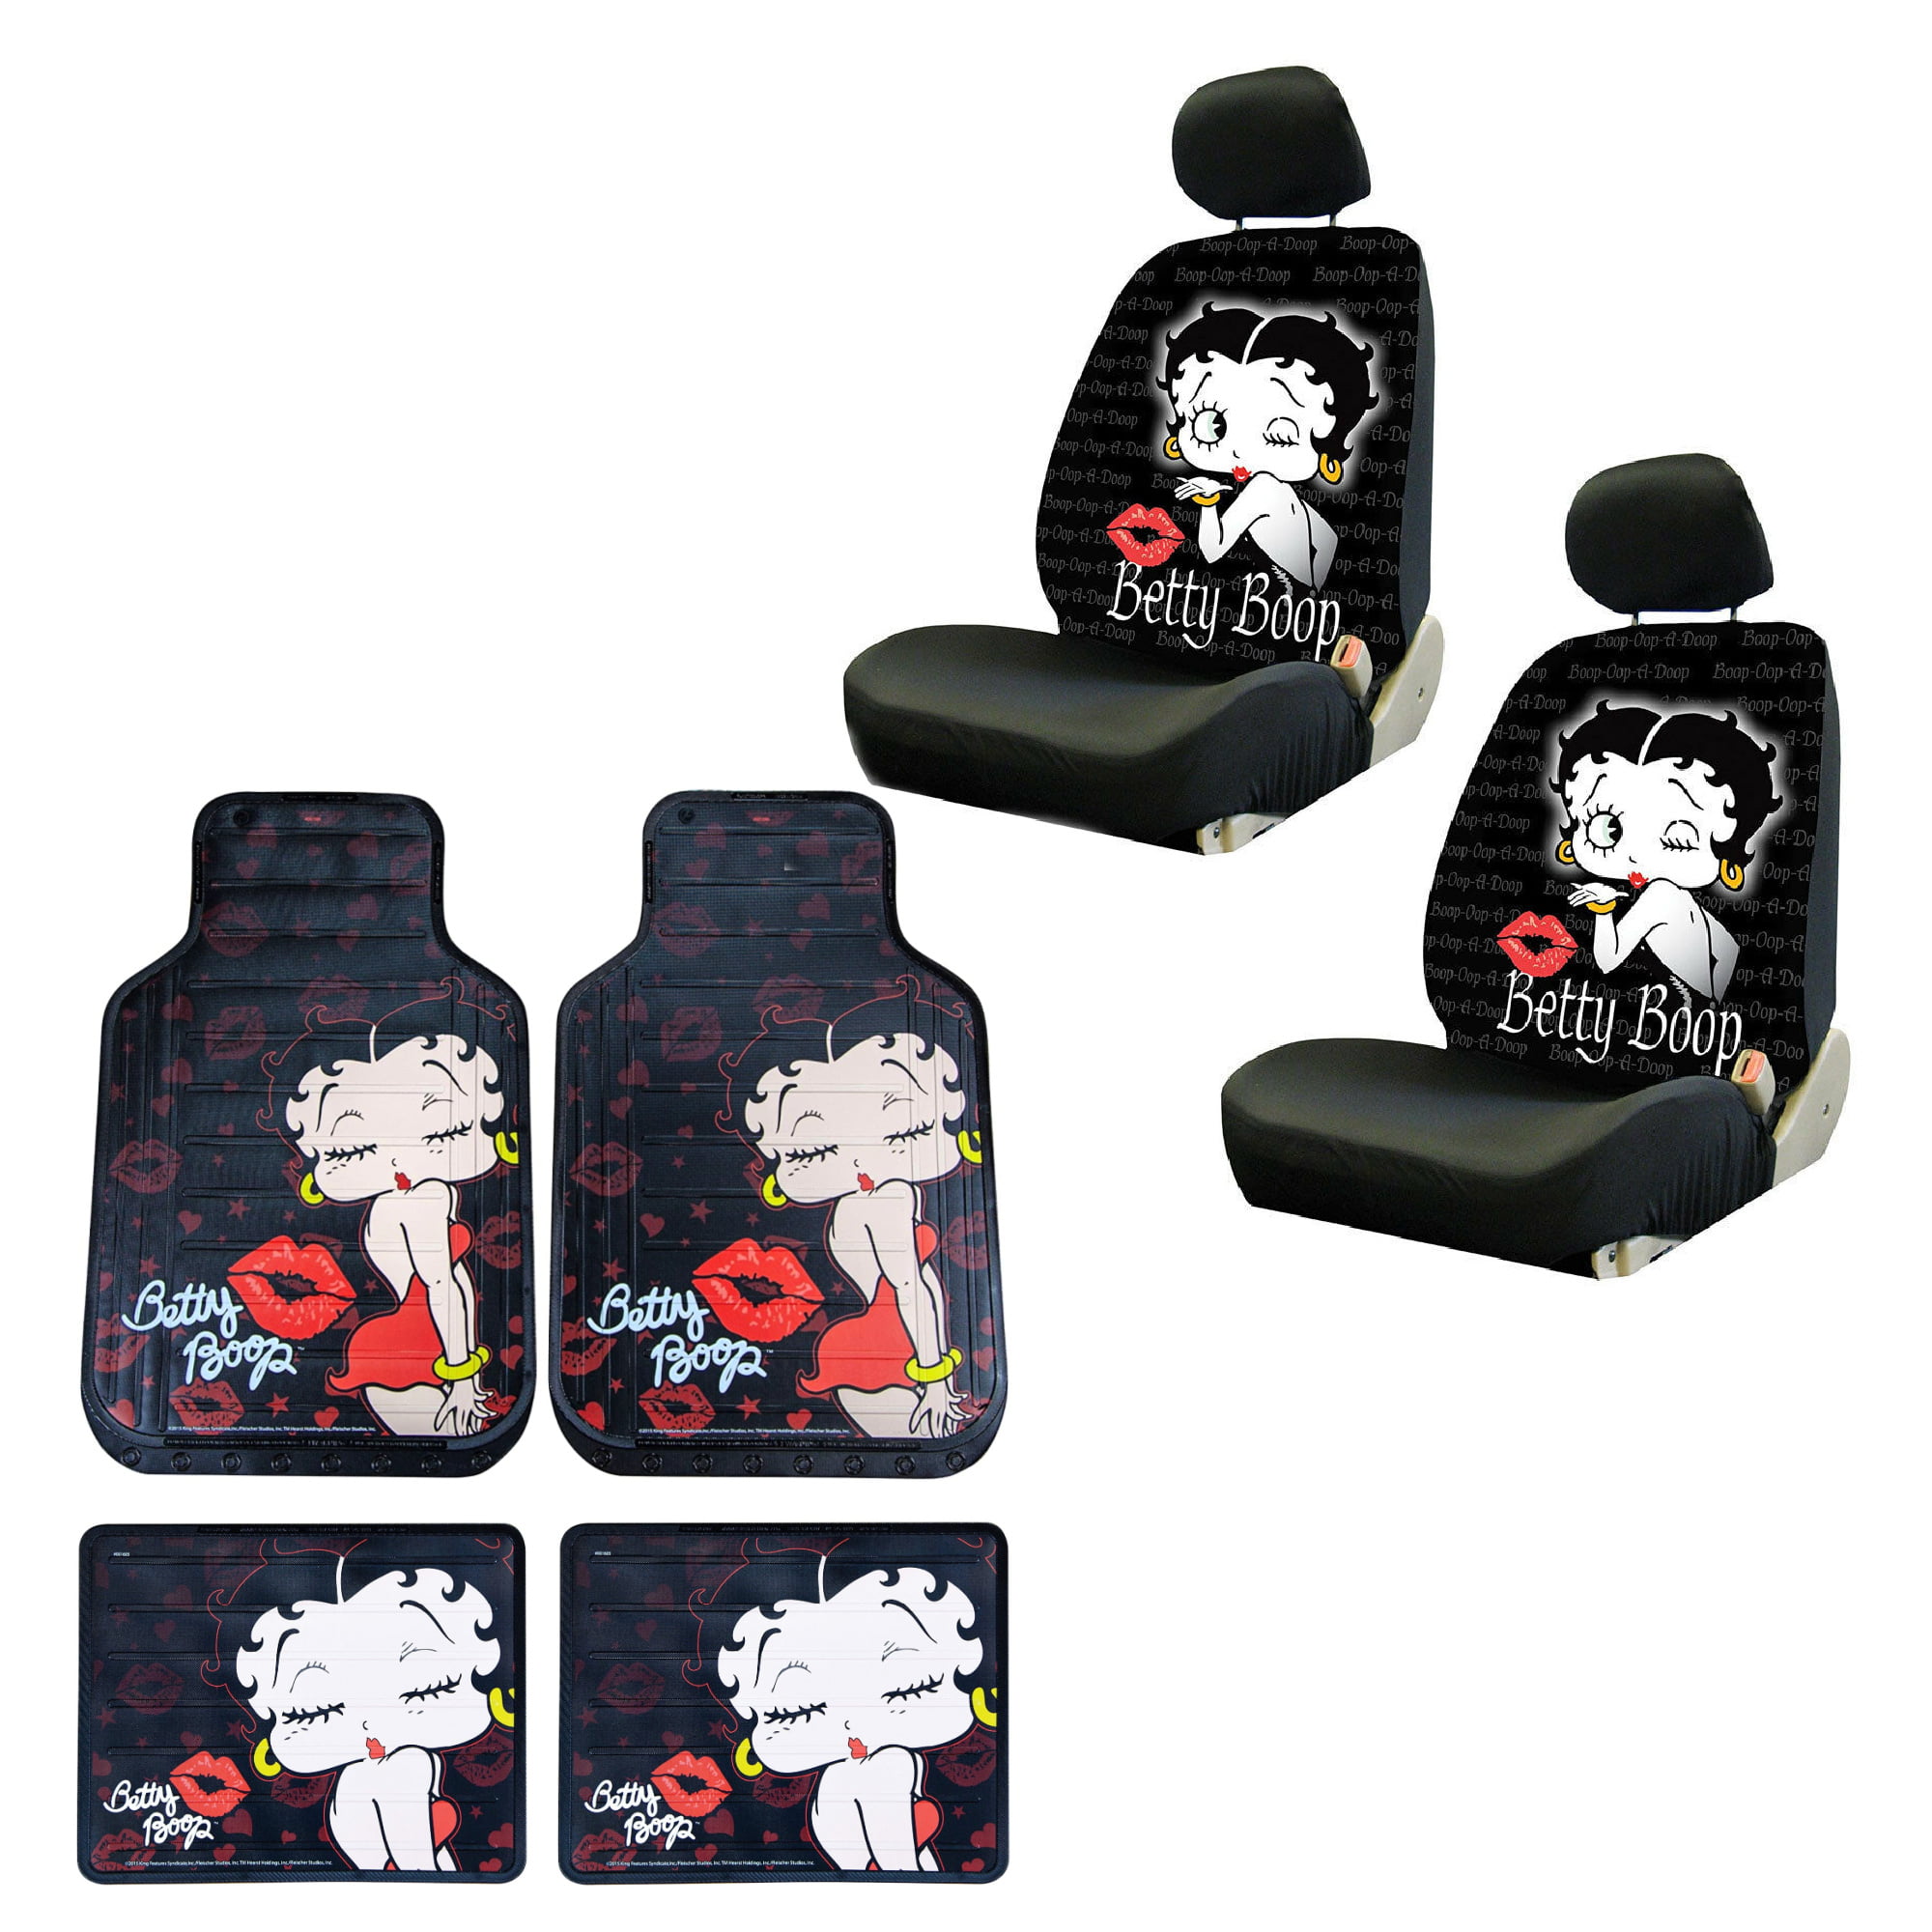 Betty Boop Cartoon Car Seat Covers Fan Gift Personalized Universal Car Seat Cover for Vehicle Customize Car Seat Cover for Woman